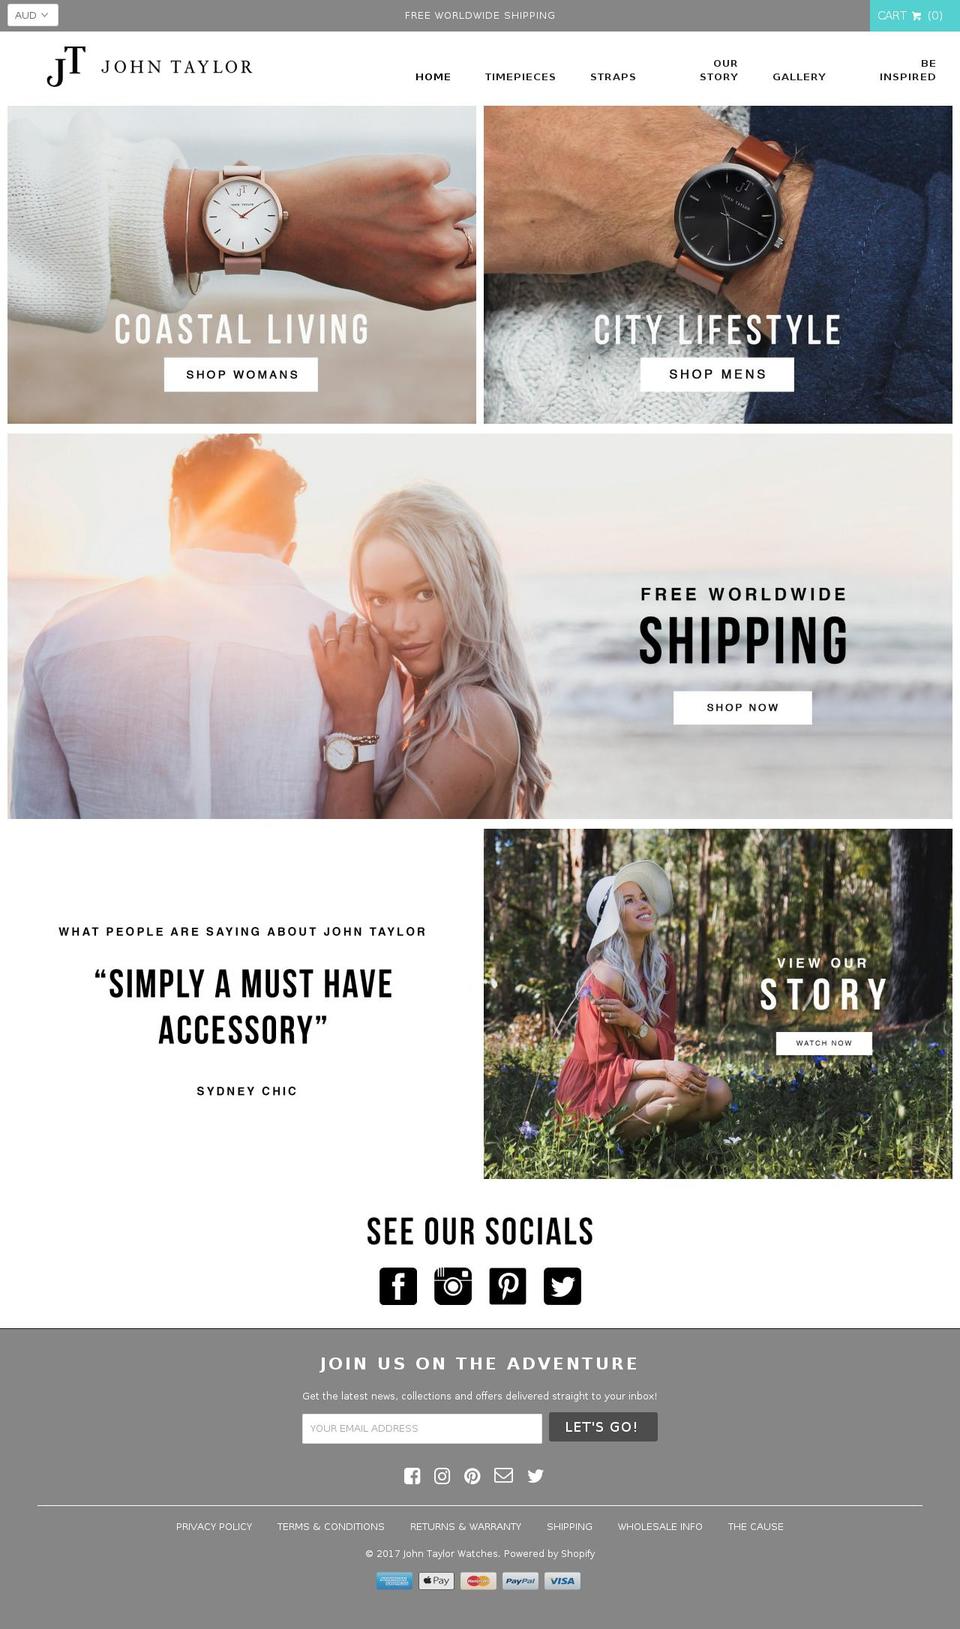 Atlantic Shopify theme site example johntaylorwatches.com